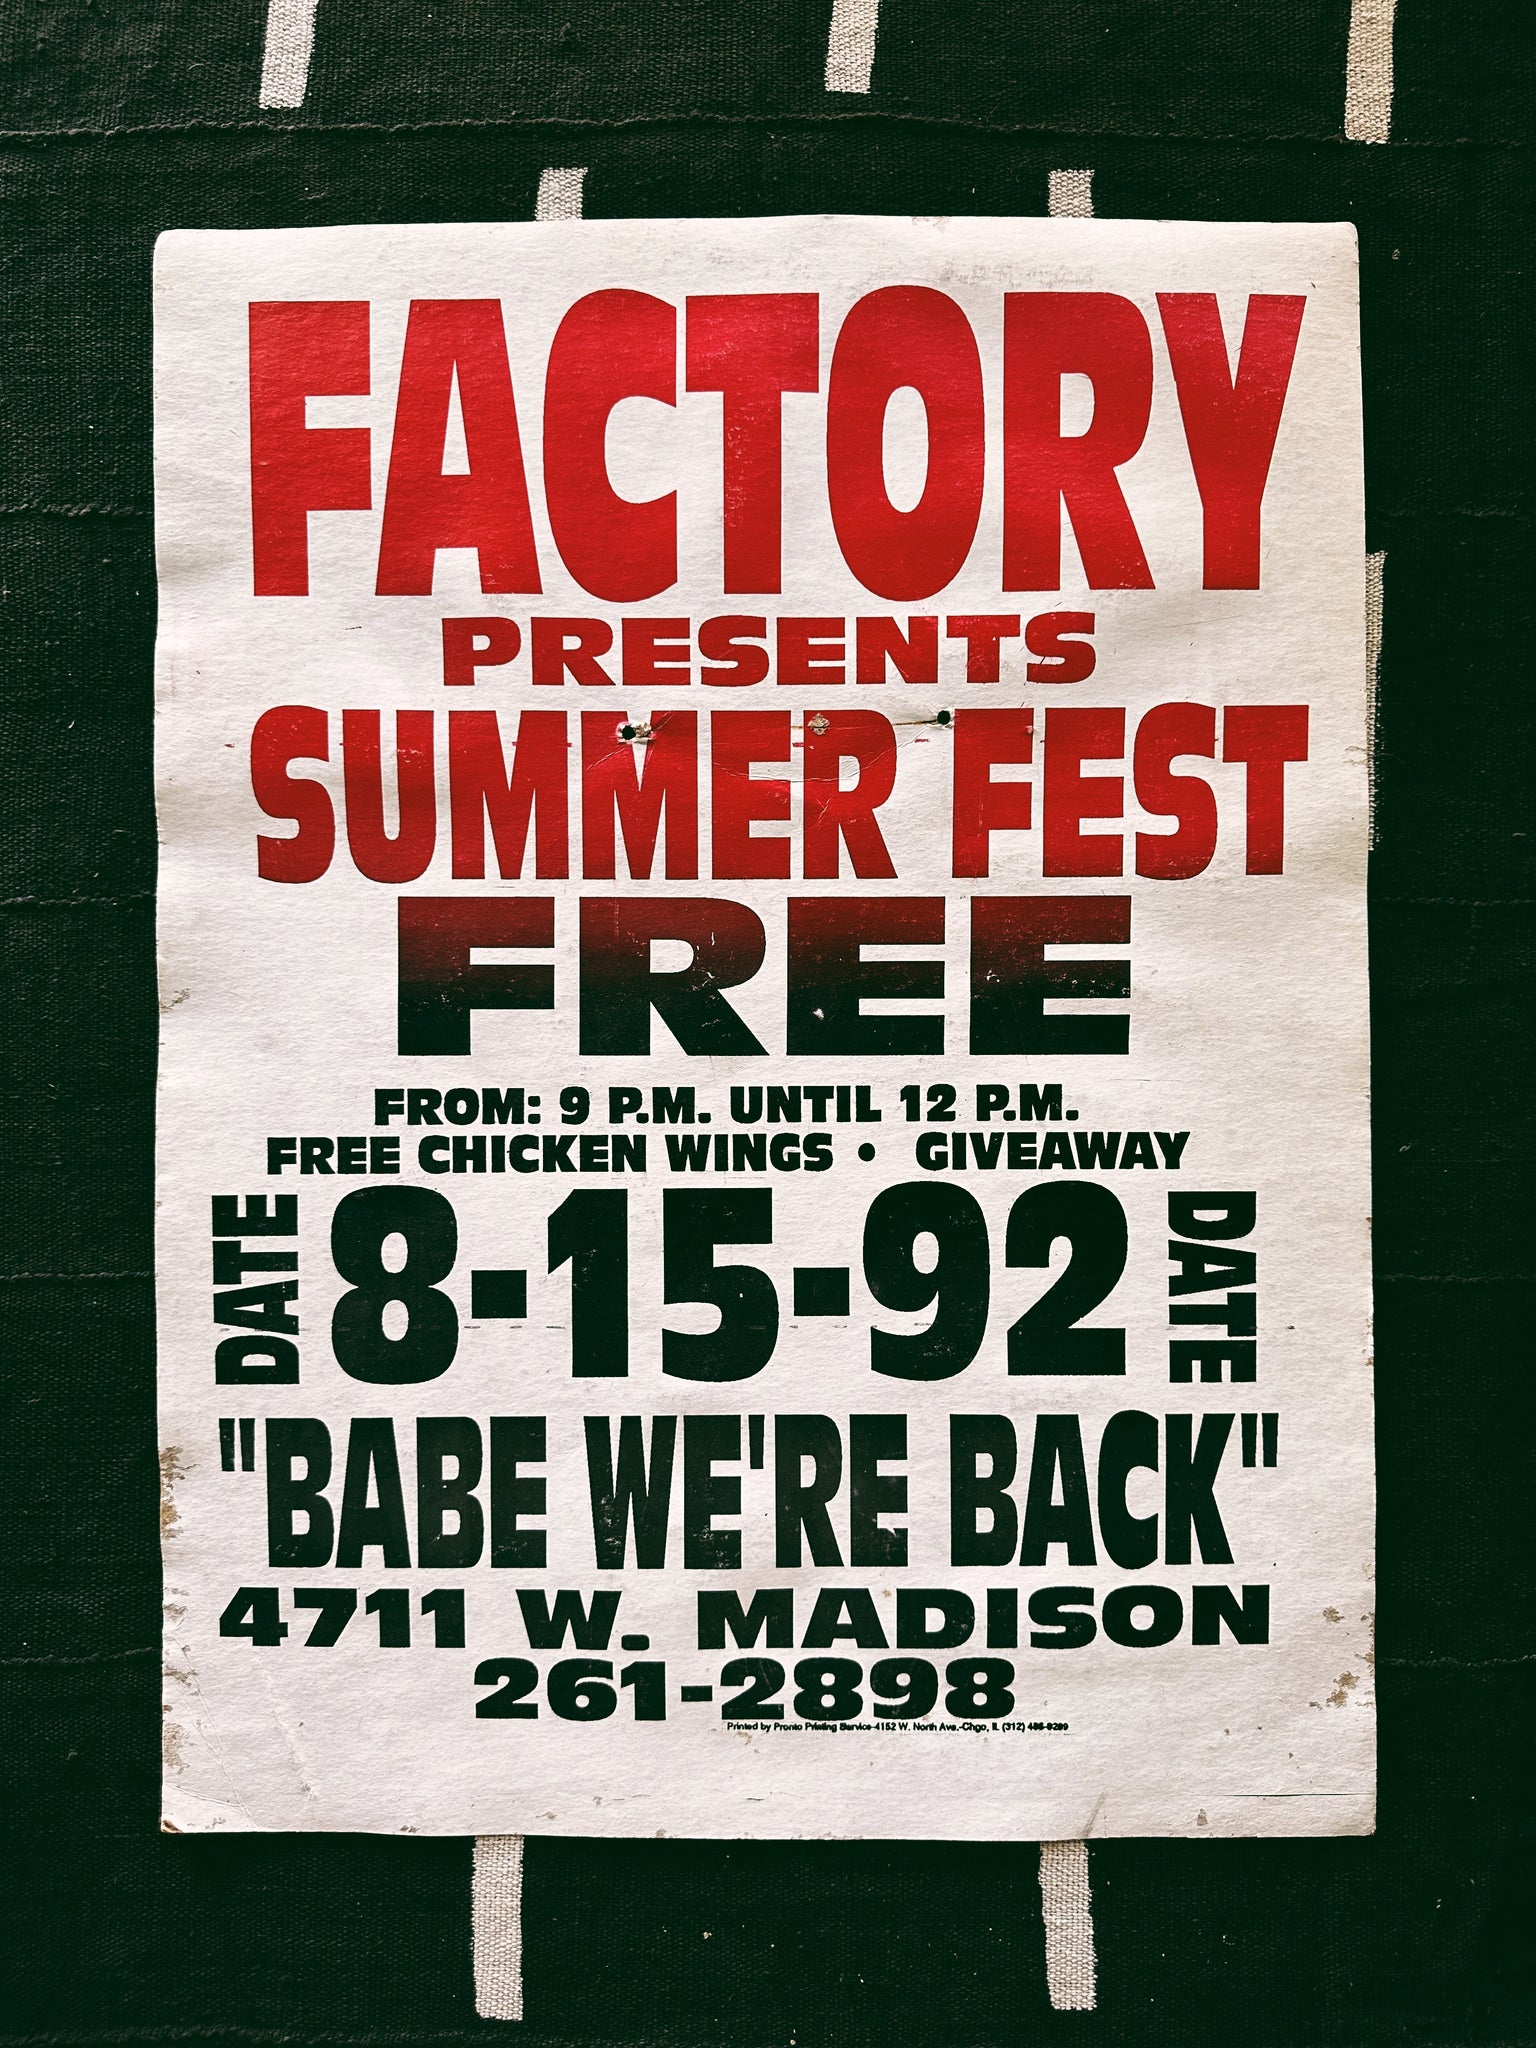 Vintage Summer Fest at The Factory Party Poster - Chicago (‘90’s + 2000’s)